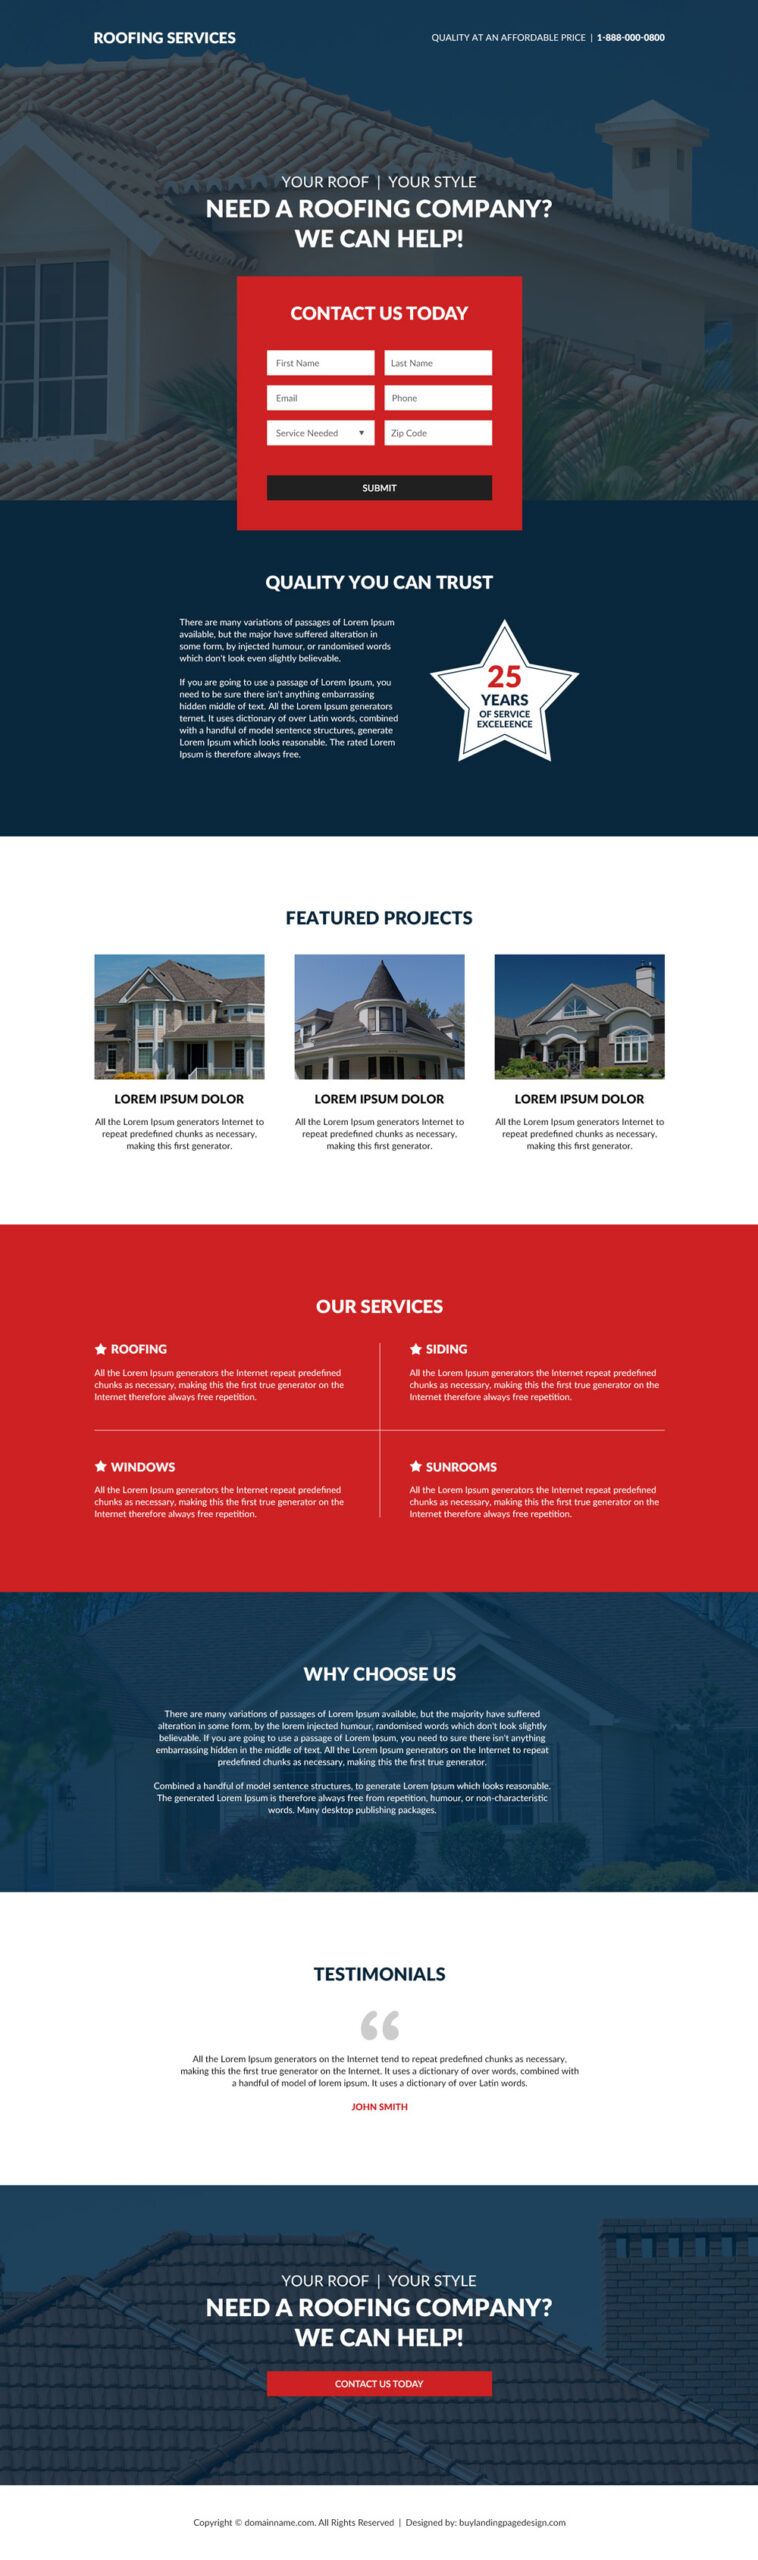 Roofing company lead generating responsive landing page